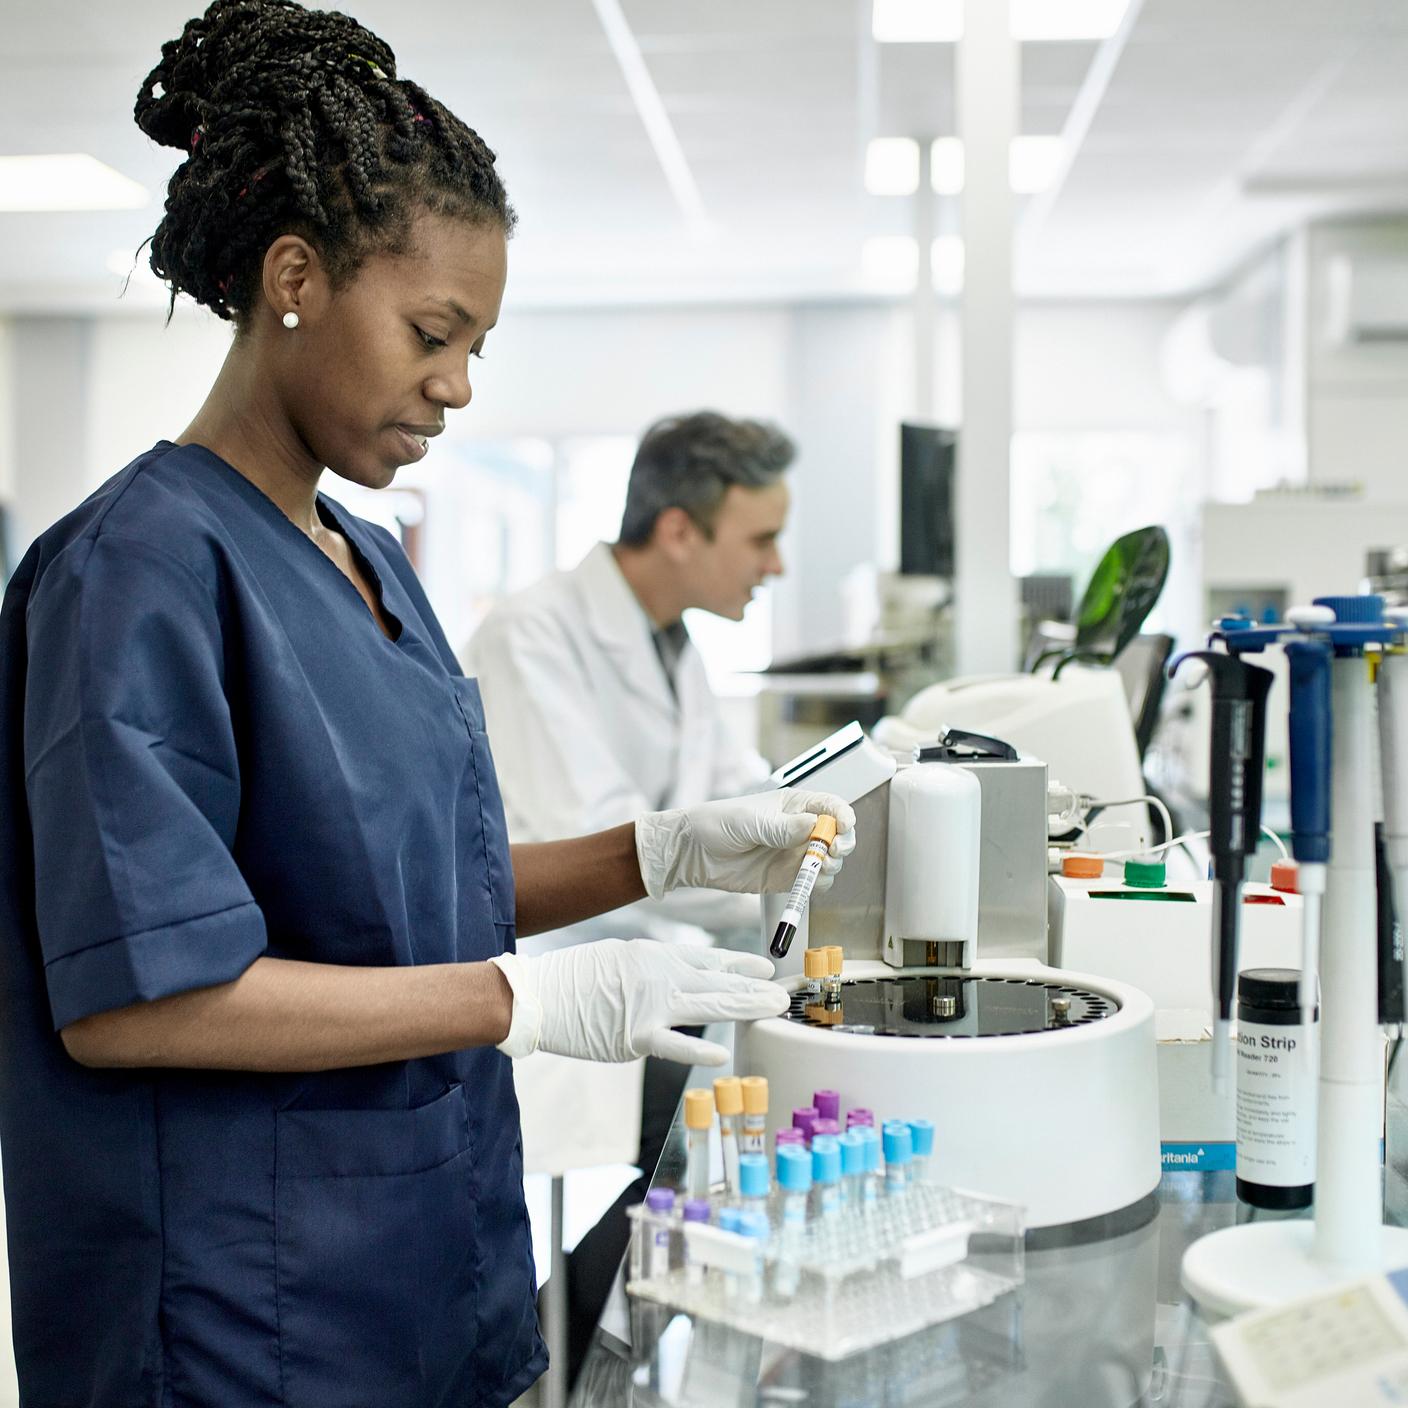 A forensic black woman working in a lab